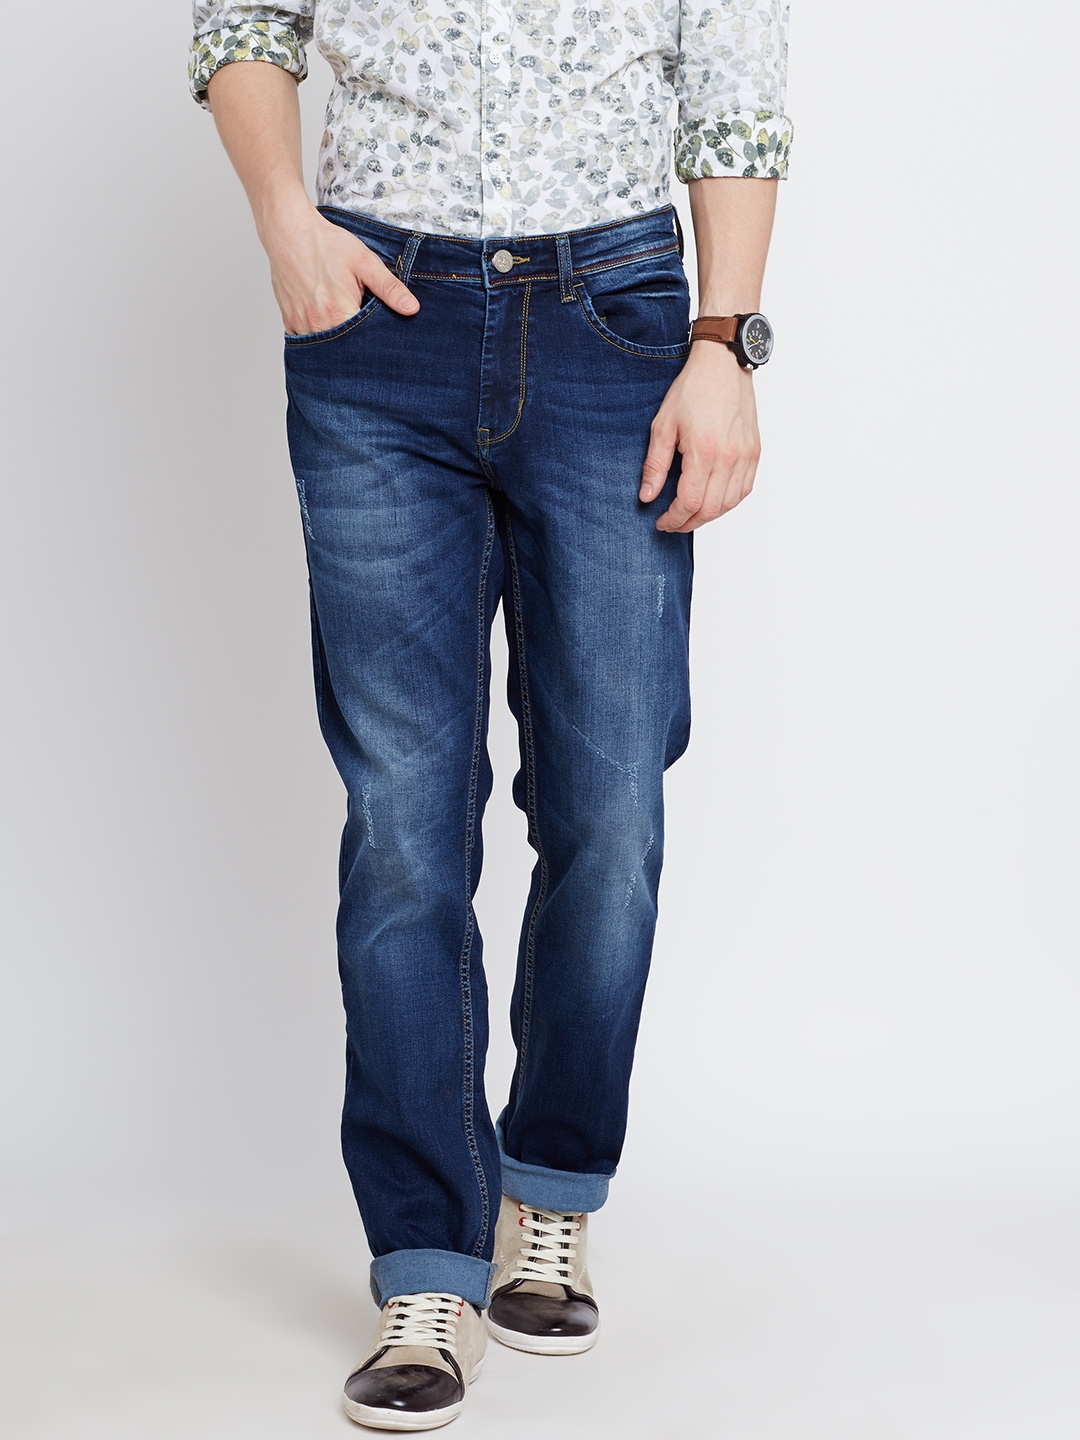 Buy Monte Carlo Blue Washed Rocco Slim Fit Jeans - Jeans for Men ...